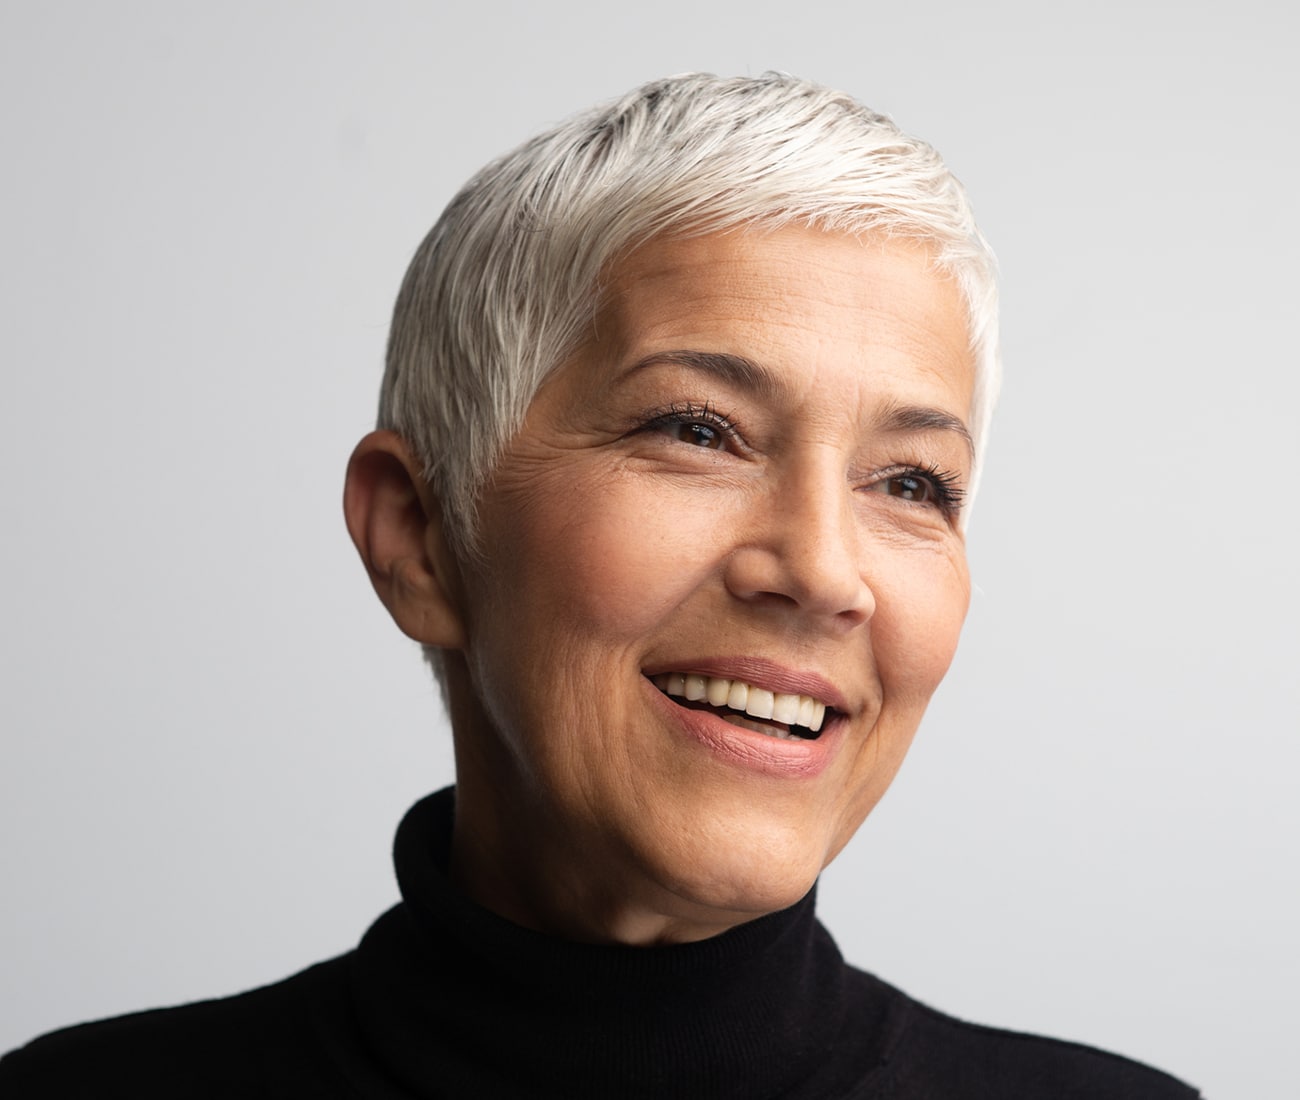 An Older Woman With Short, White Hair Smiling And Looking Off To The Right